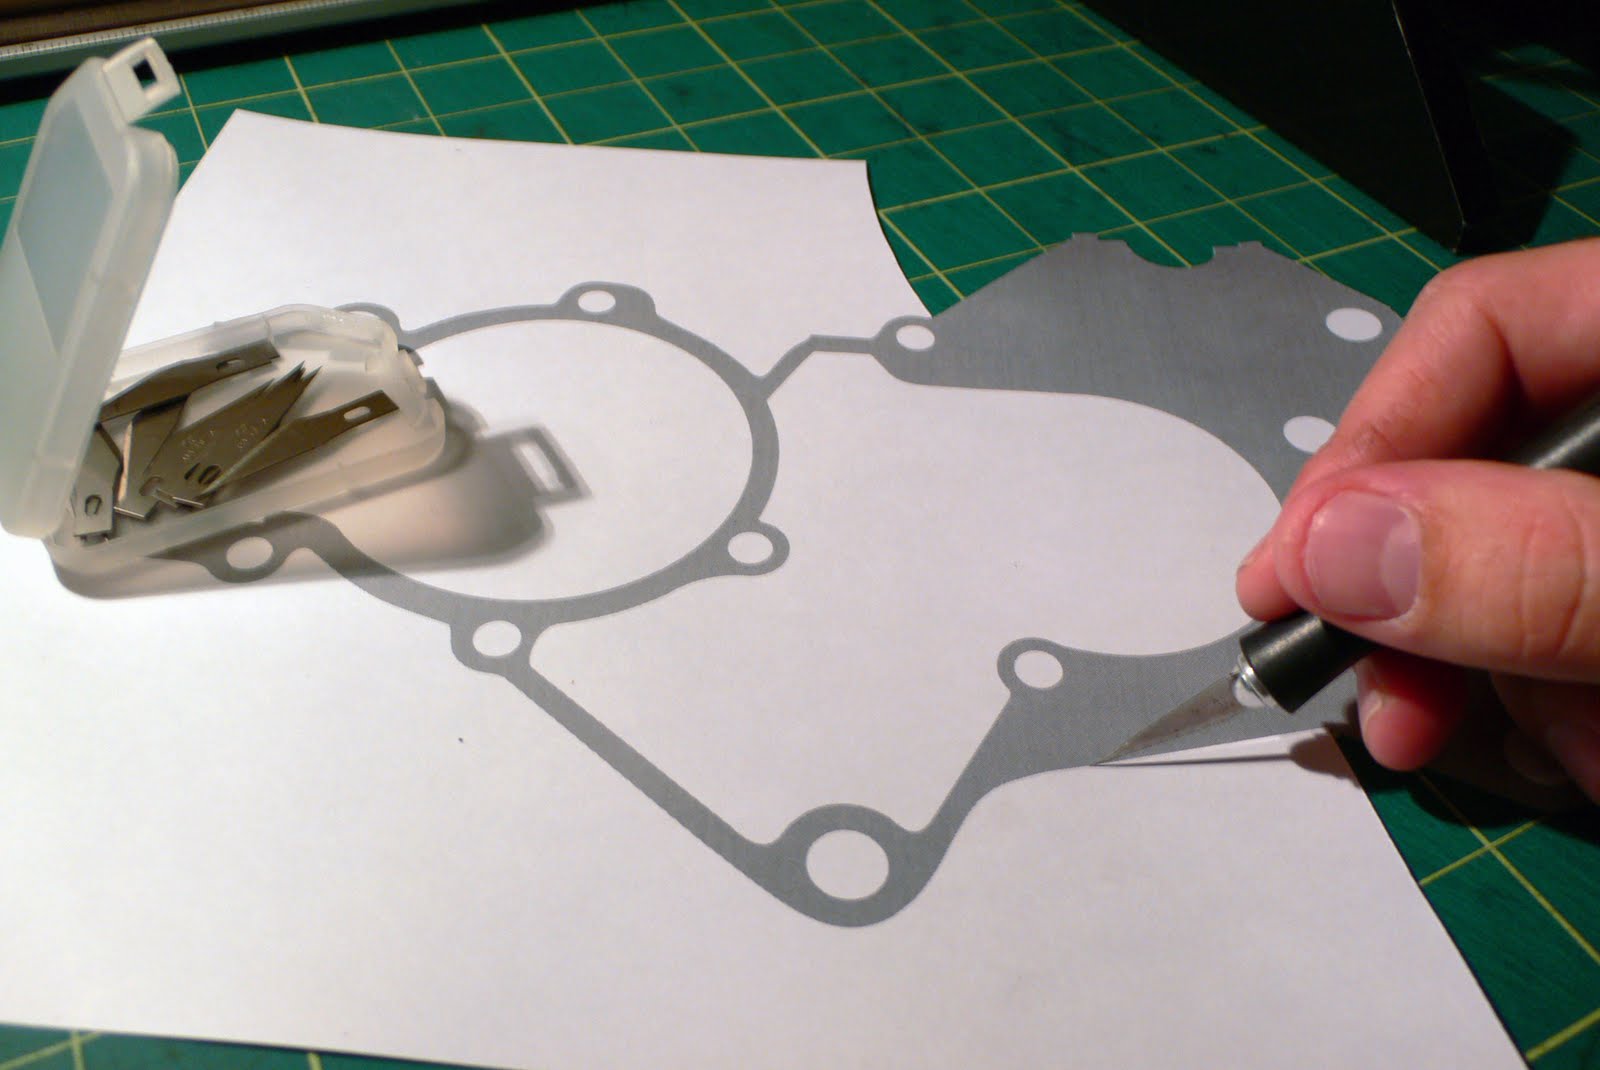 cut out the printed paper gasket utilizing an Xacto knife and